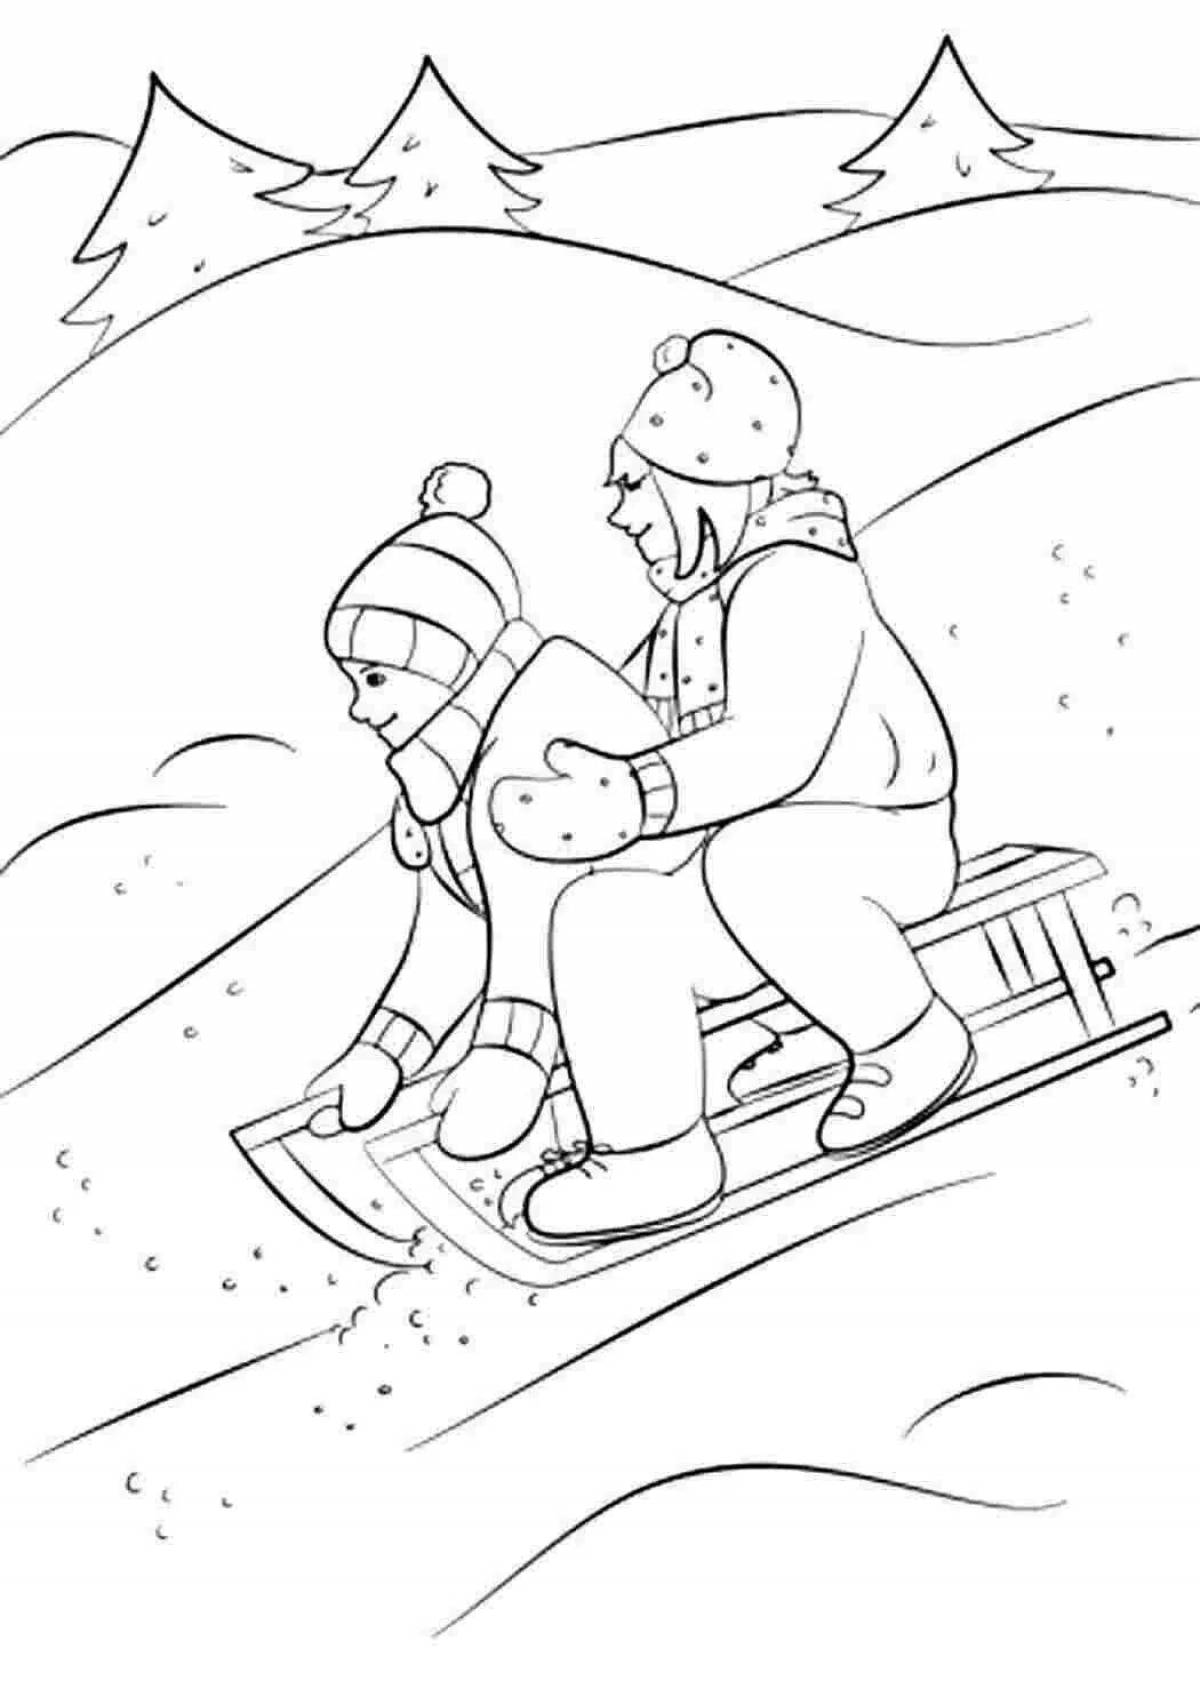 Fancy sled coloring for children